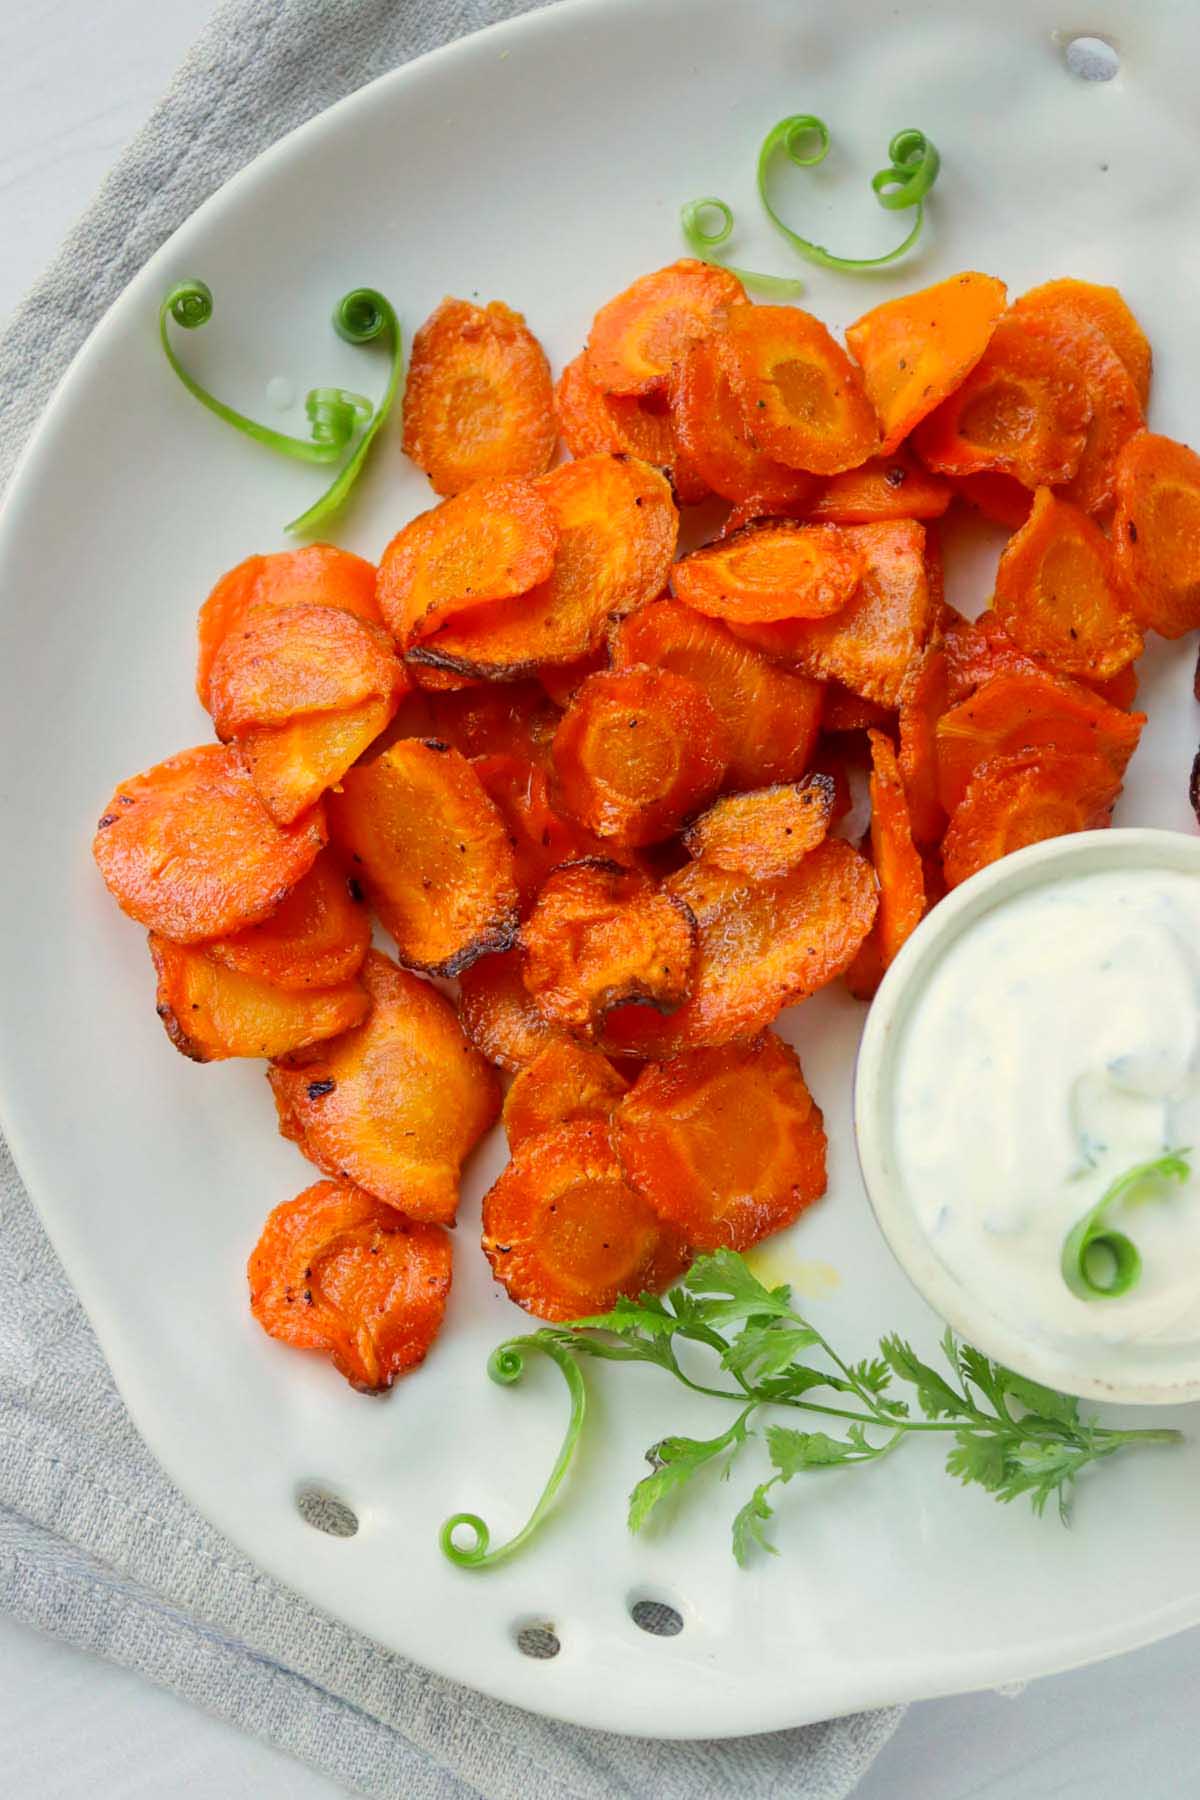 Carrot chips on a plate with ranch dip.